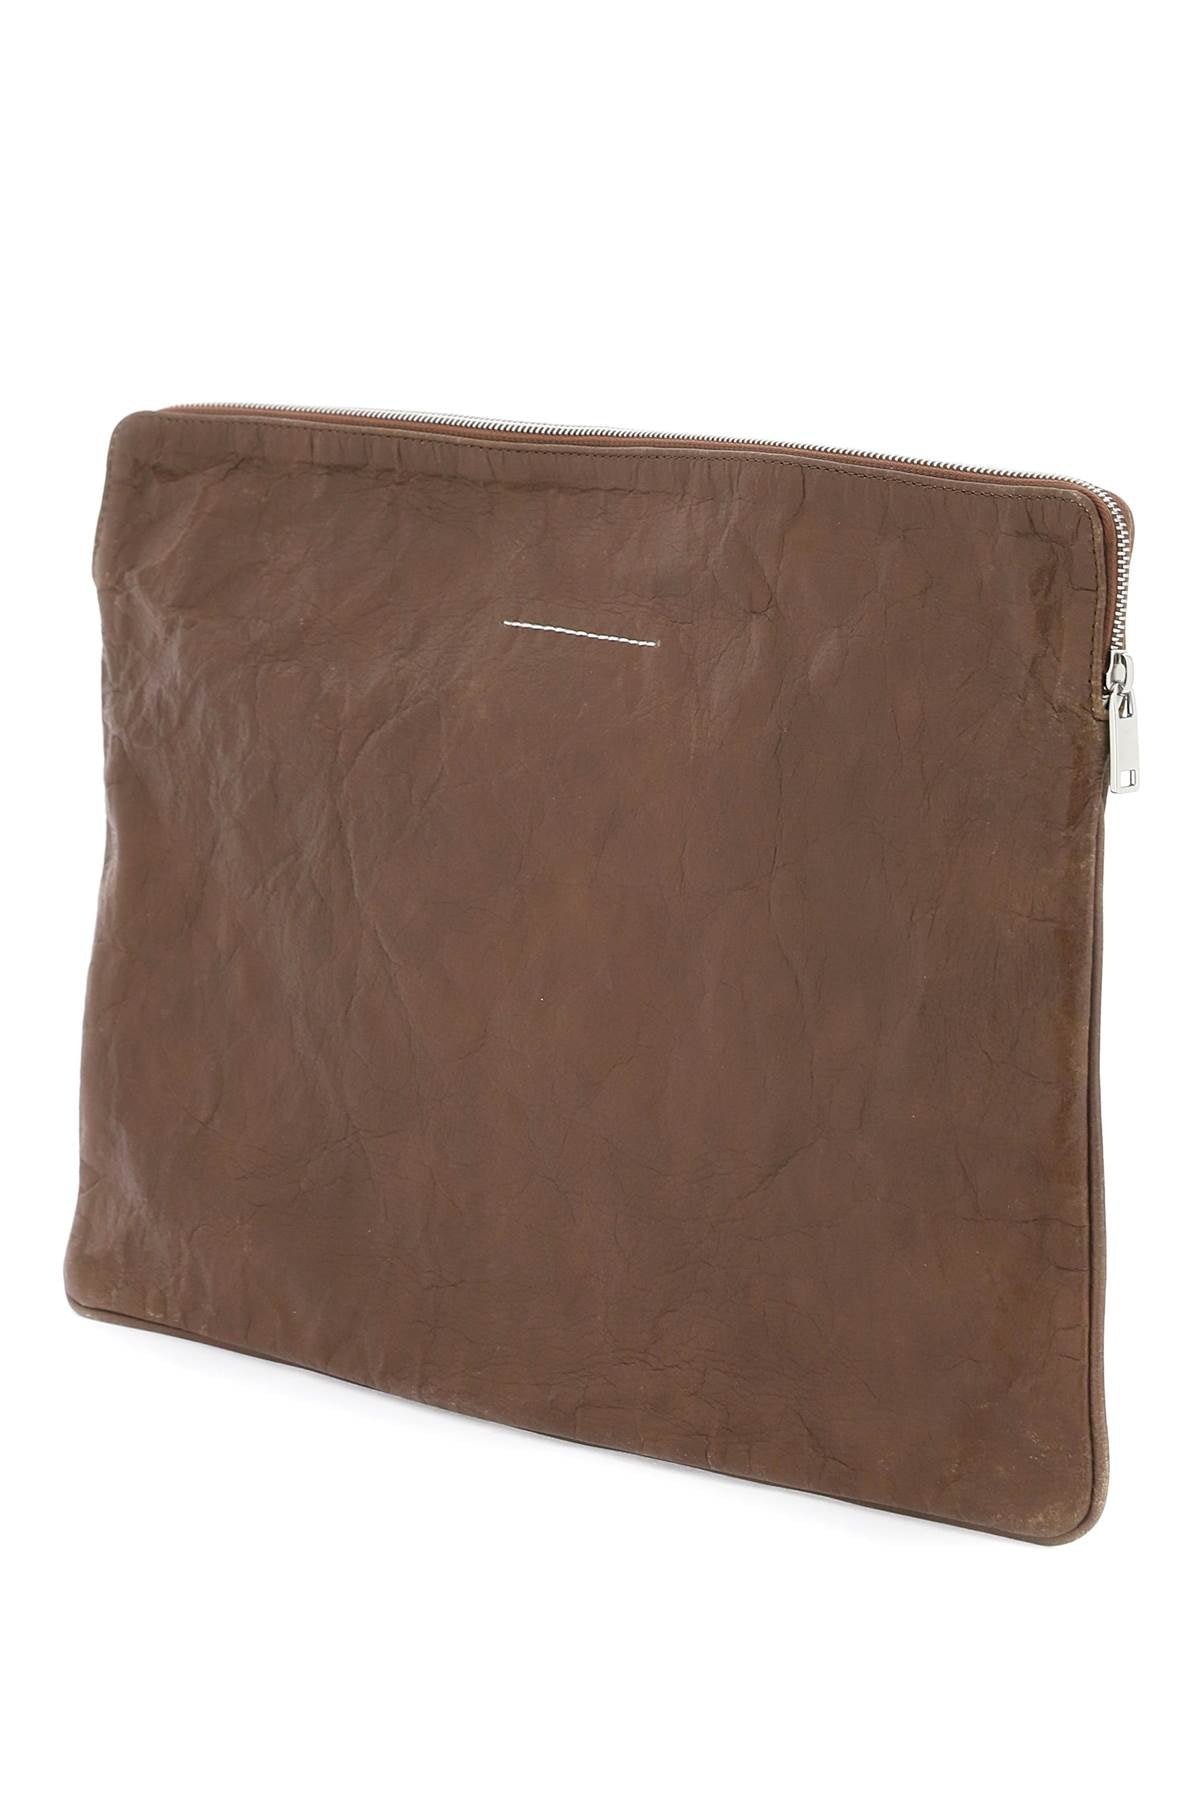 Mm6 Maison Margiela Crinkled Leather Document Holder Pouch   Brown